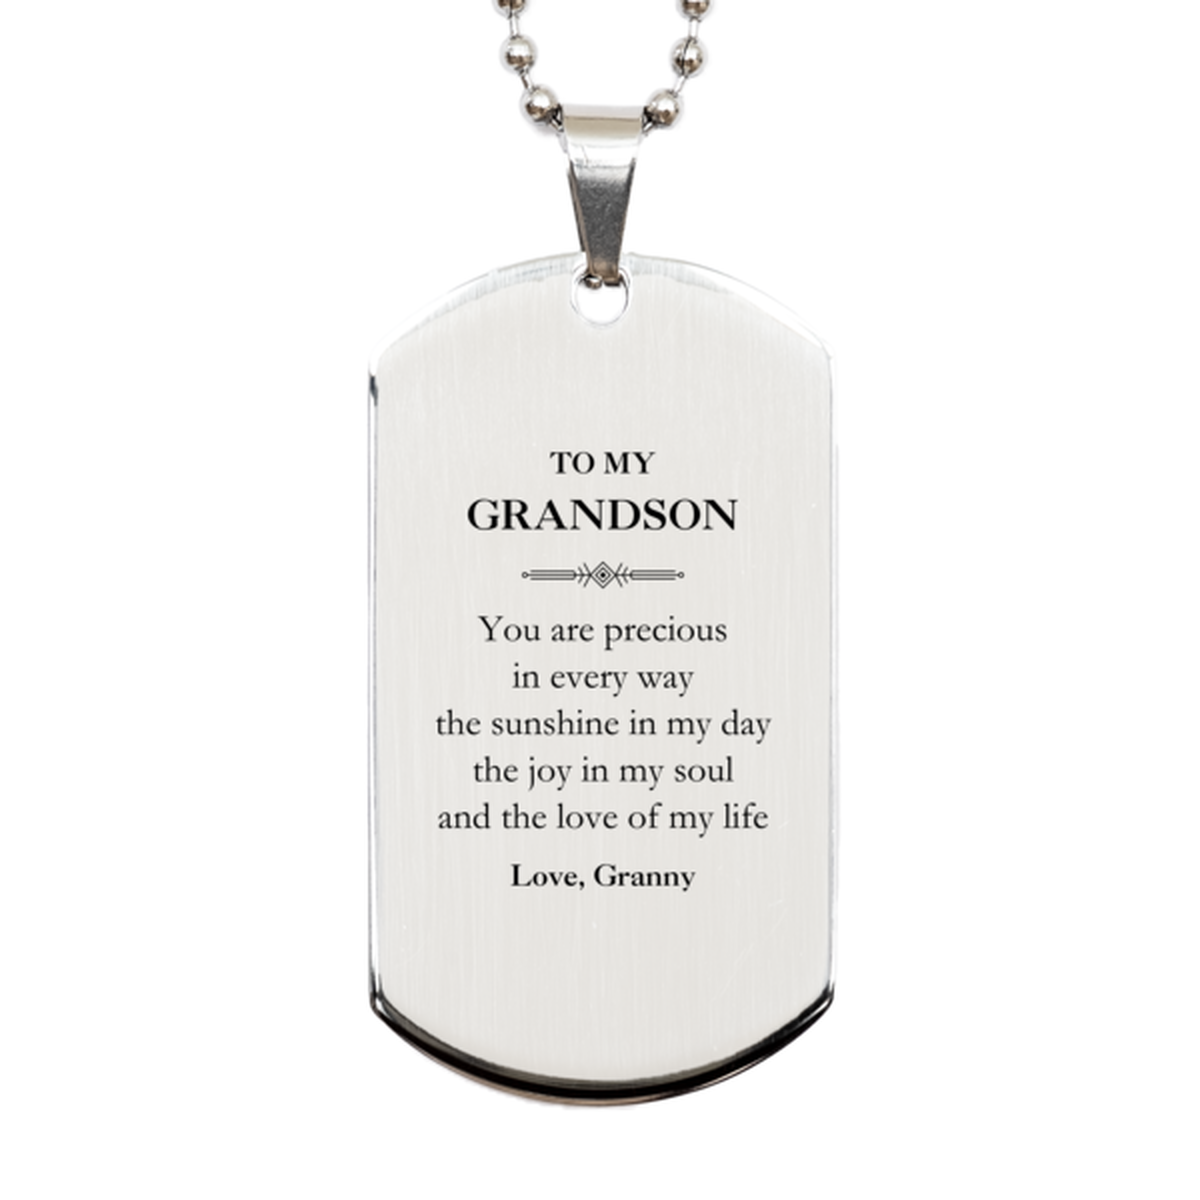 Graduation Gifts for Grandson Silver Dog Tag Present from Granny, Christmas Grandson Birthday Gifts Grandson You are precious in every way the sunshine in my day. Love, Granny